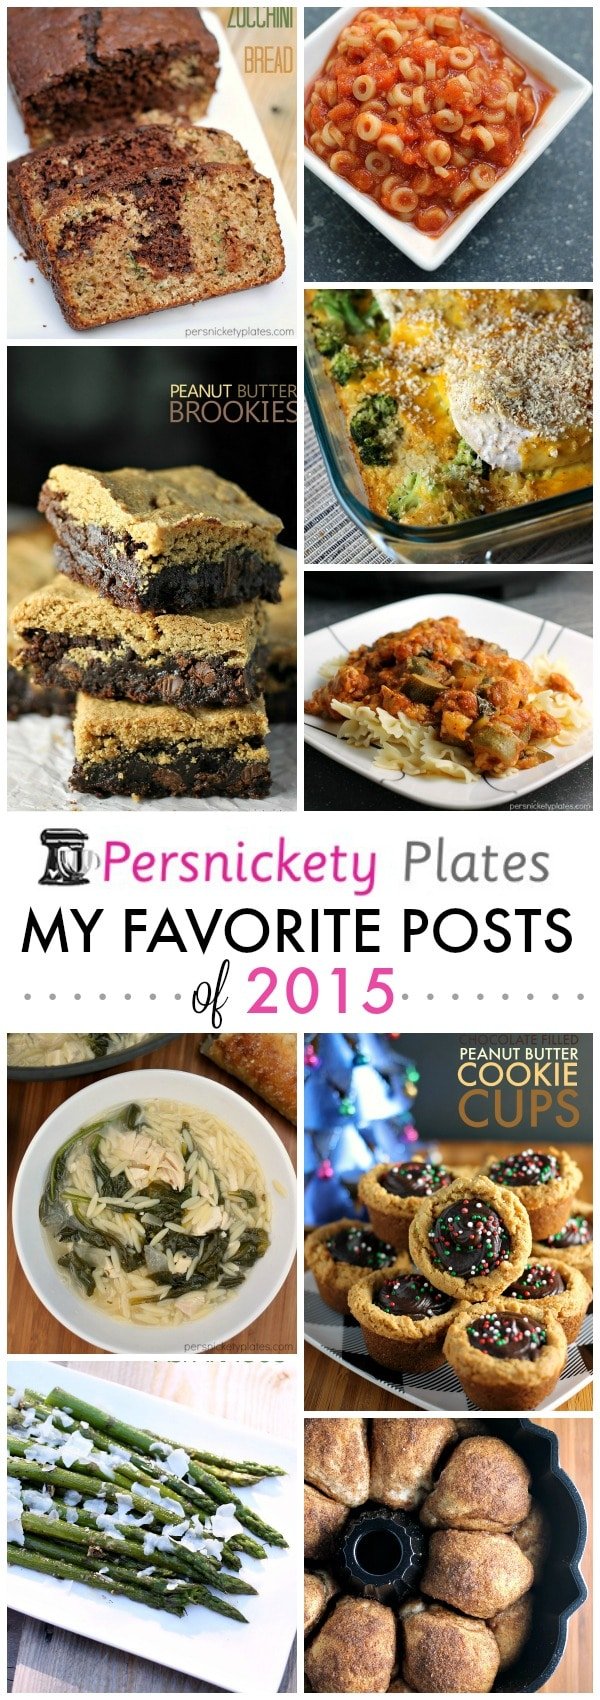 Persnickety Plates Top 10 Personal Favorite Posts from 2015